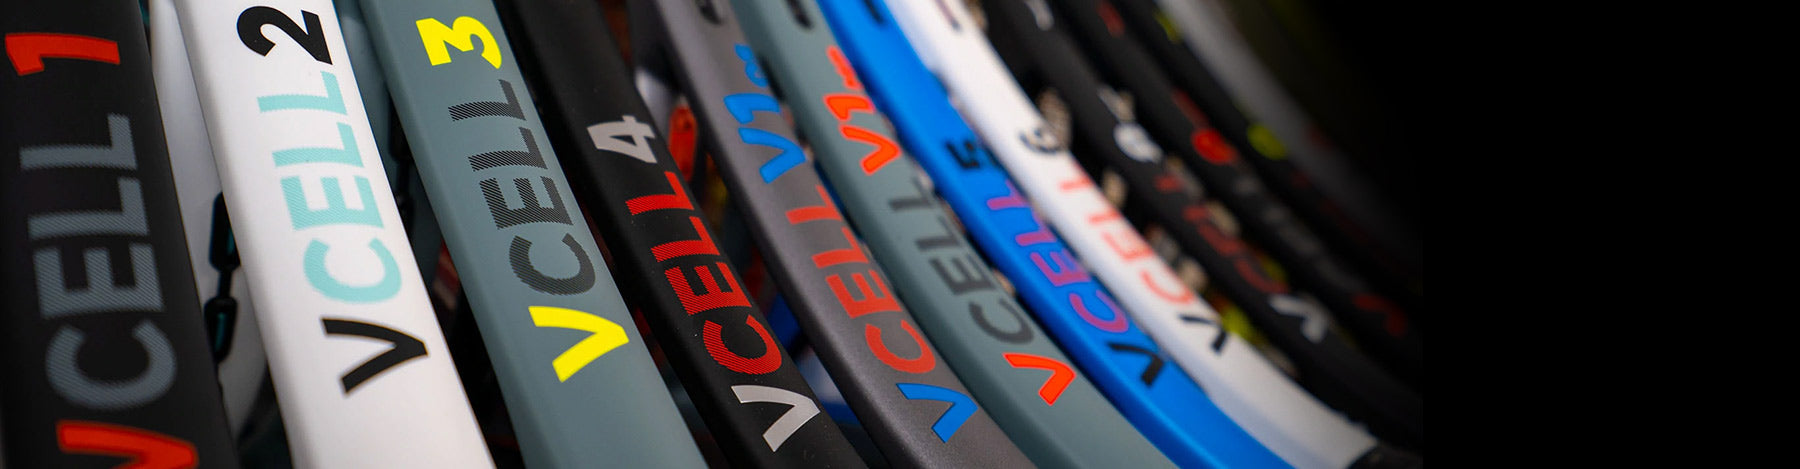 Close up view of the Volkl V-Cell family of tennis racquets sitting in a row.